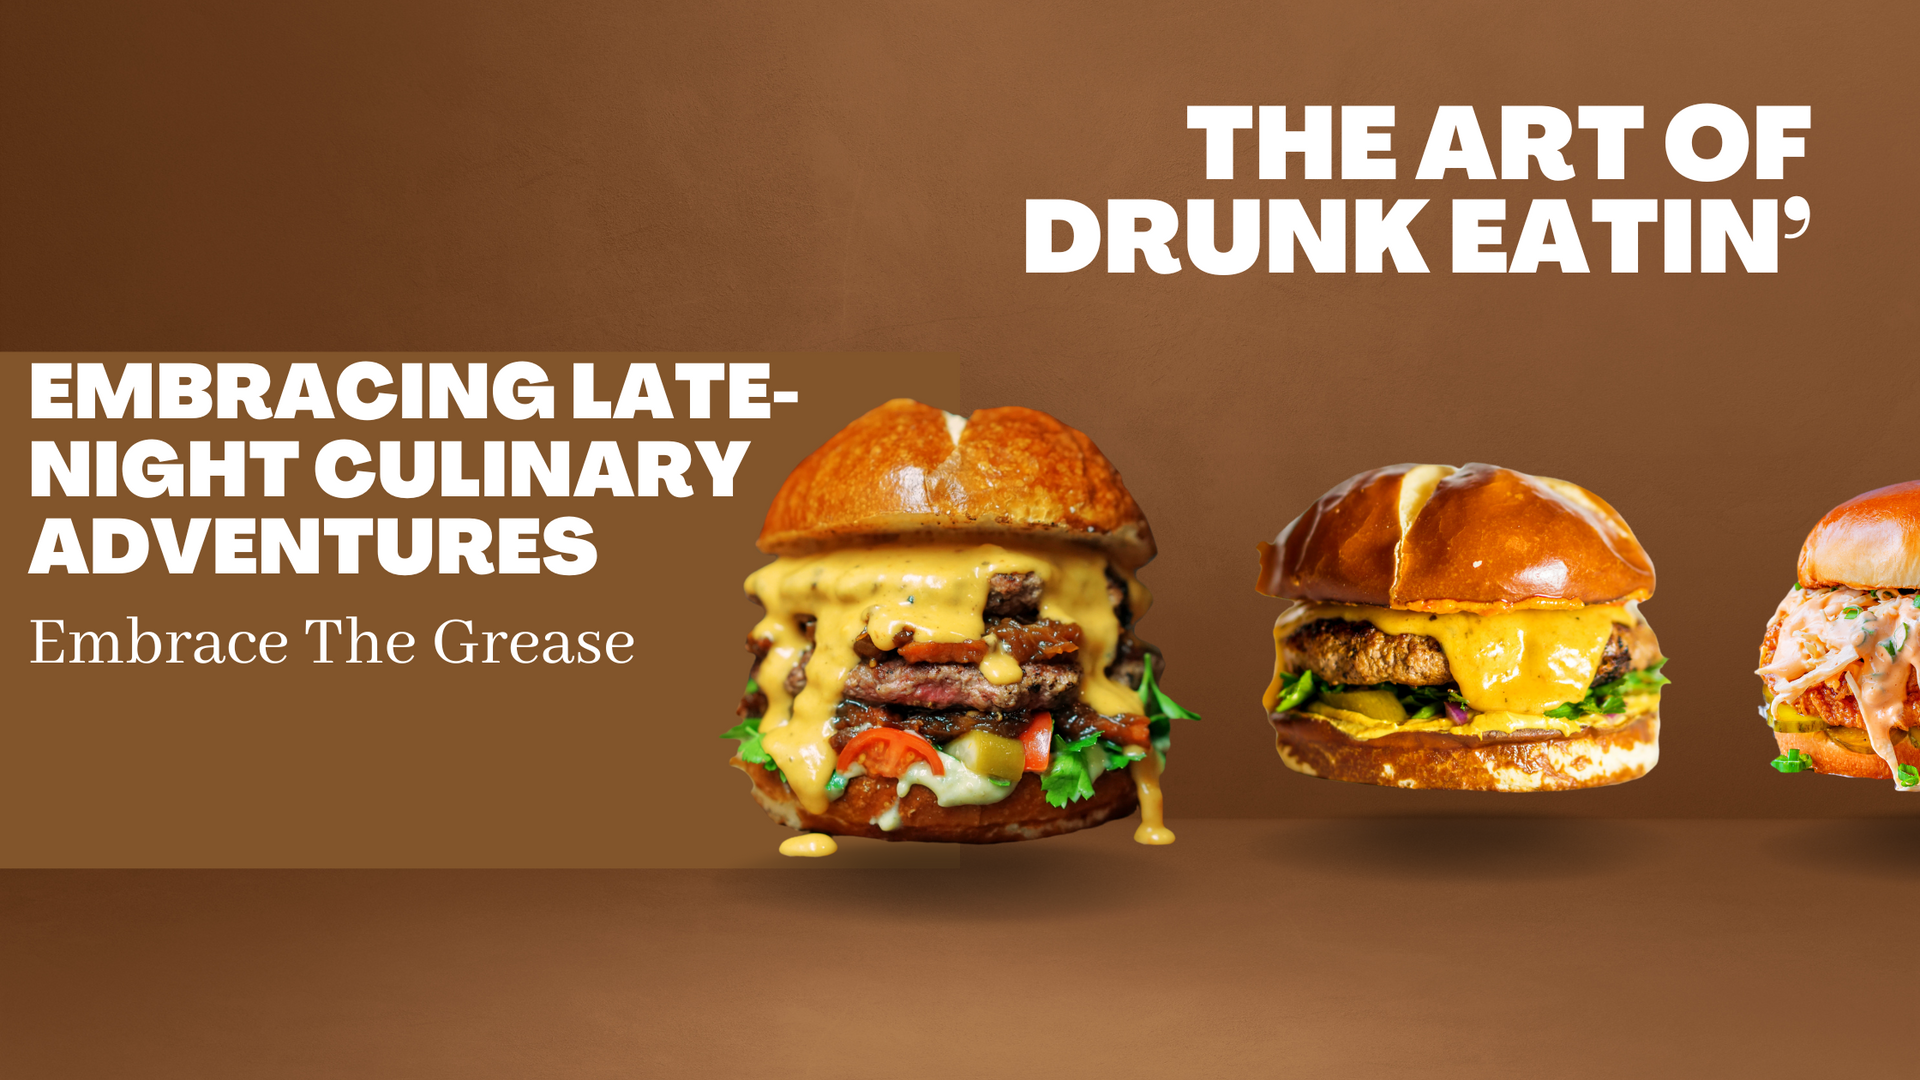 The Art of Drunk Eatin': Embracing Late-Night Culinary Adventures